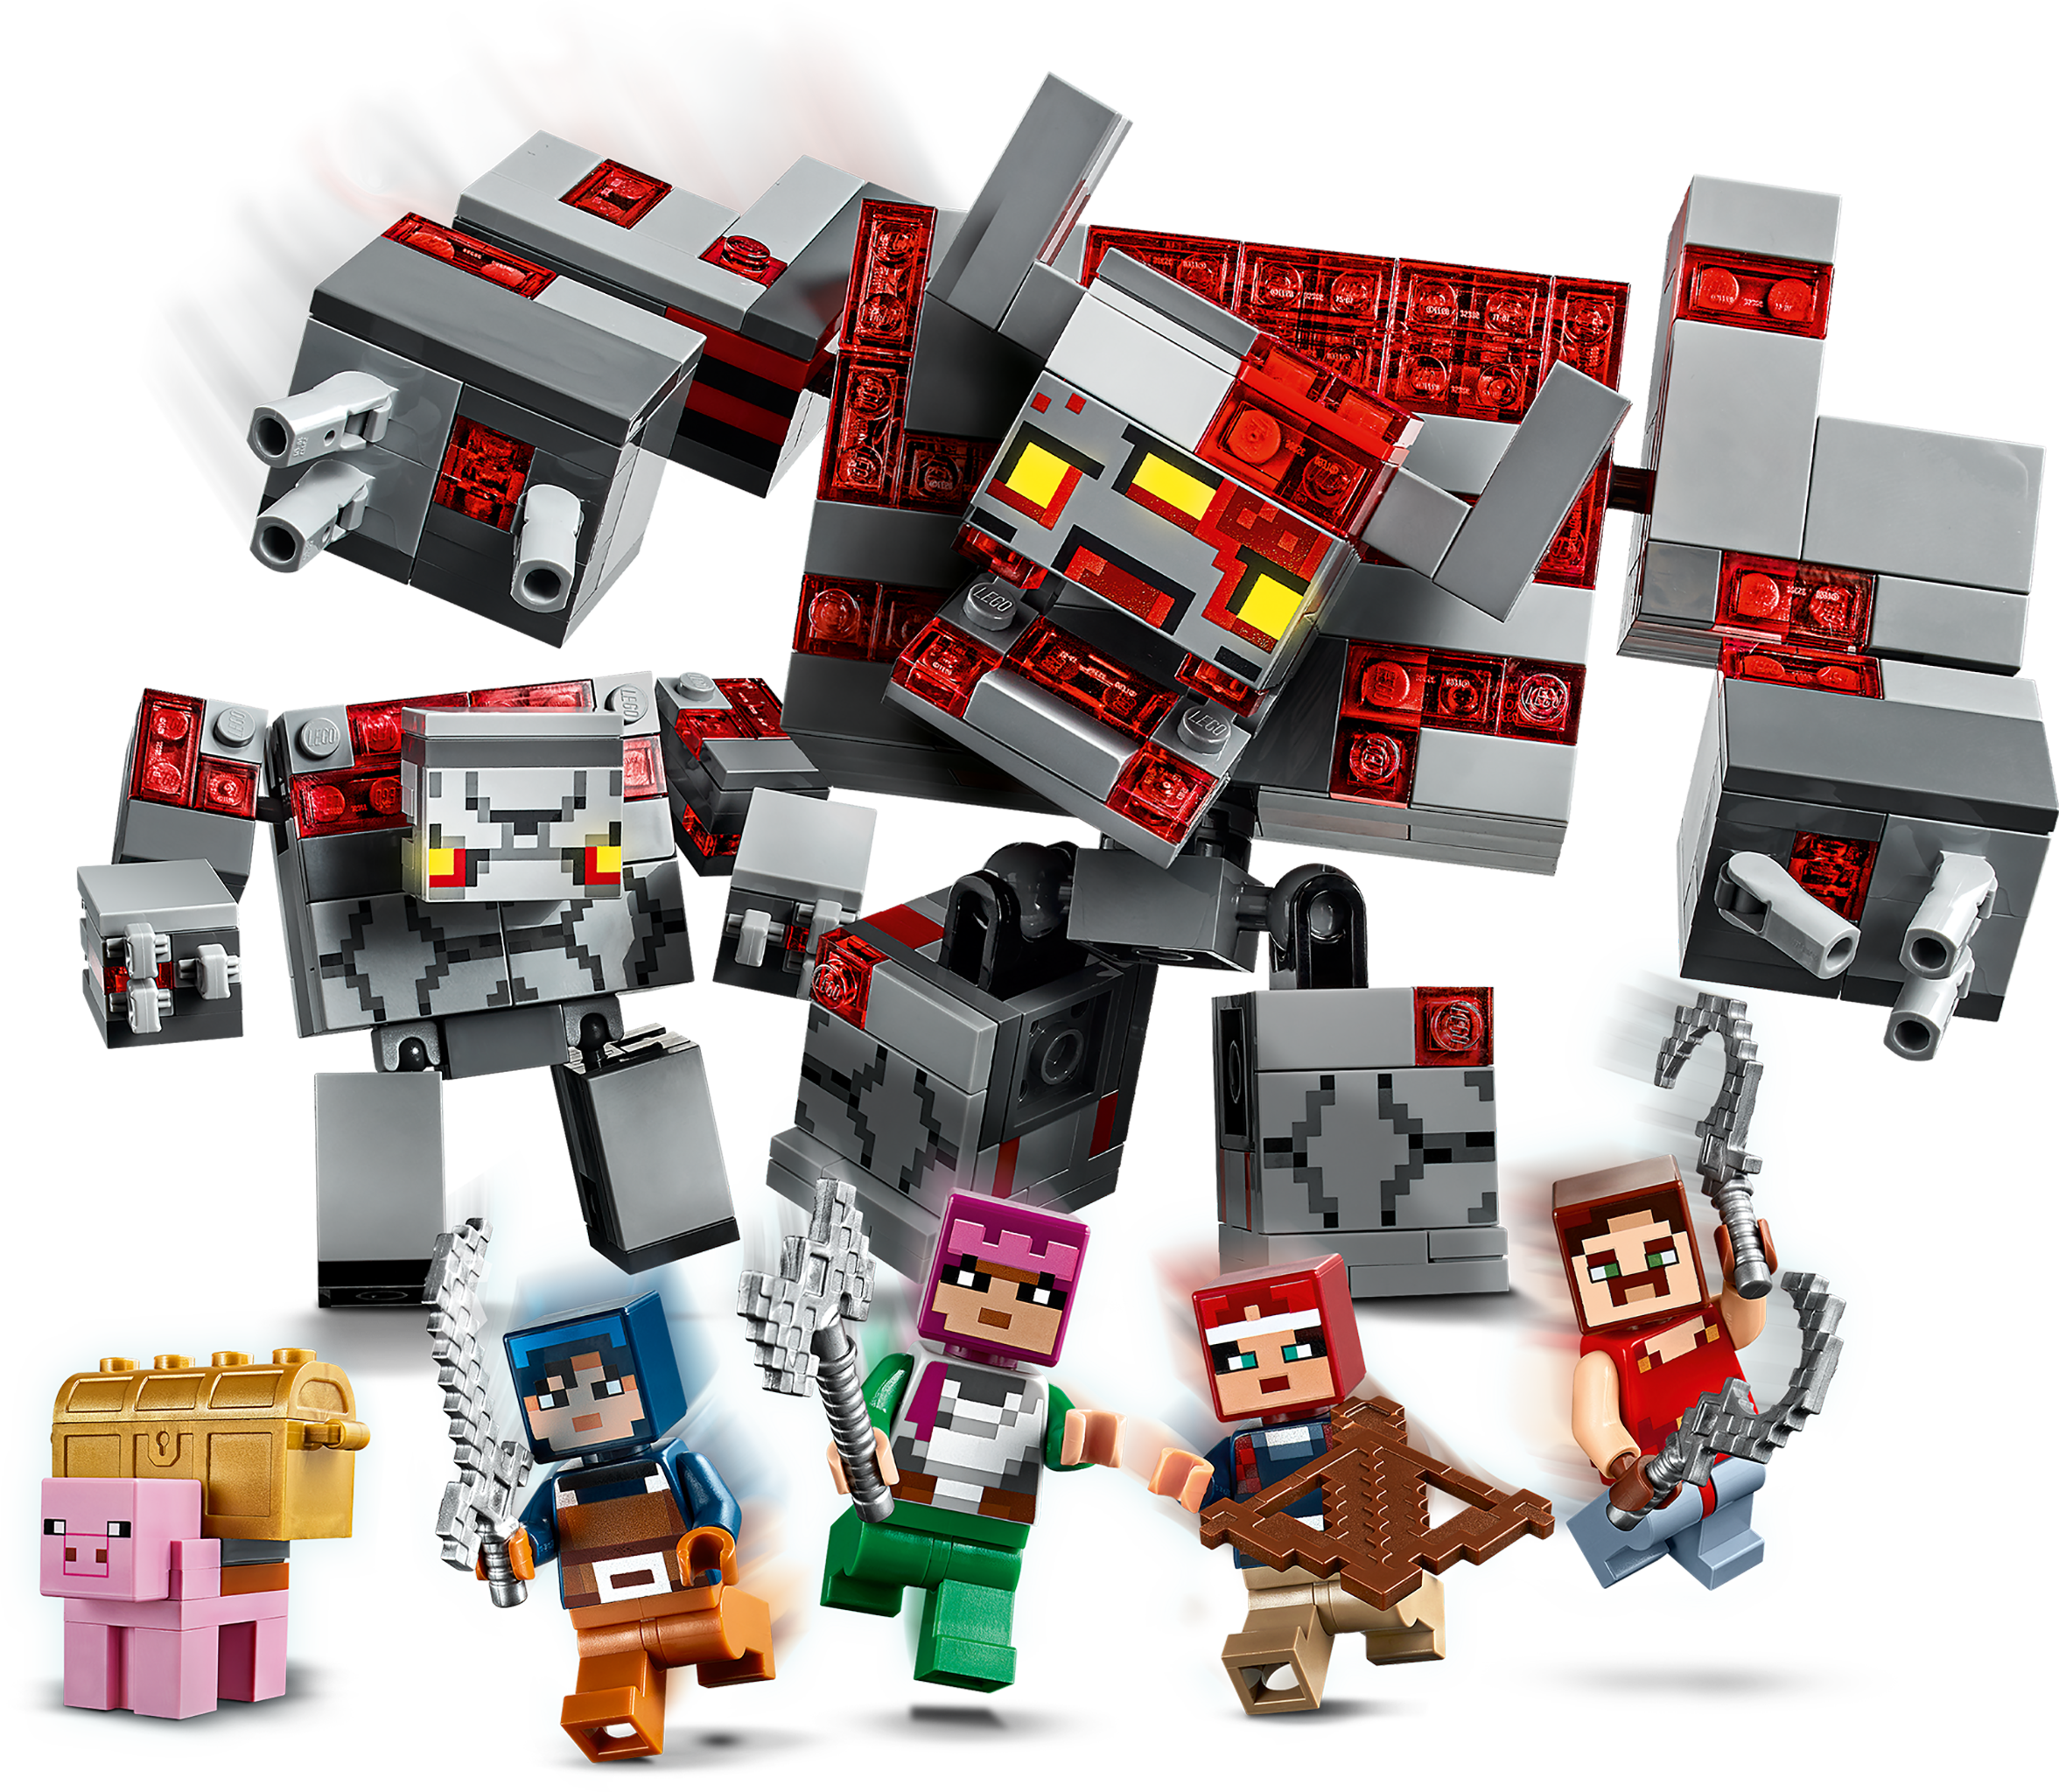 The Redstone Battle Minecraft Buy Online At The Official Lego Shop Us